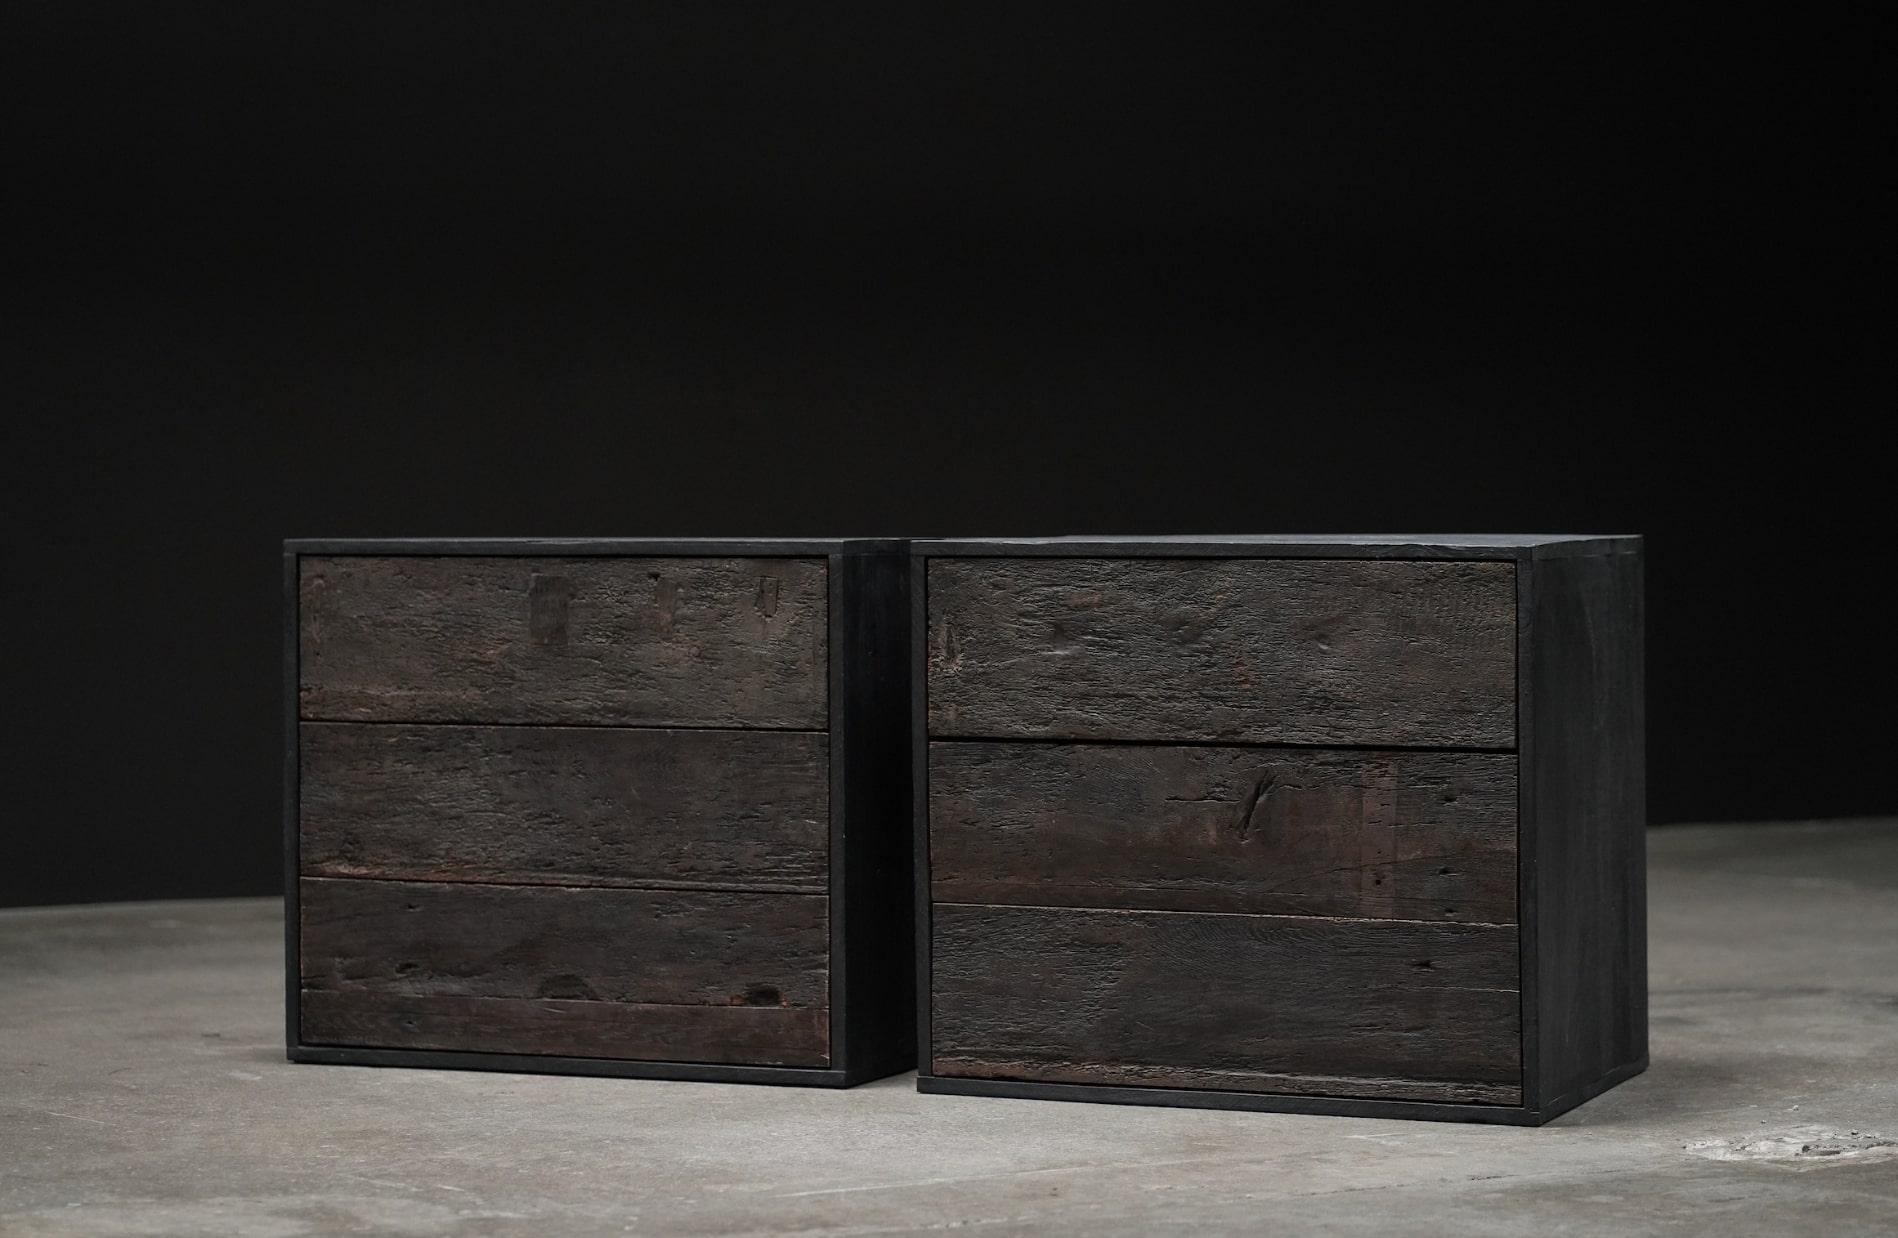 Rustic Nightstands, Belgium; 
Drawer Faces: Antique Oak Wood
Cabinet Exterior: Old Belgian Wood with Dark Stain Finish